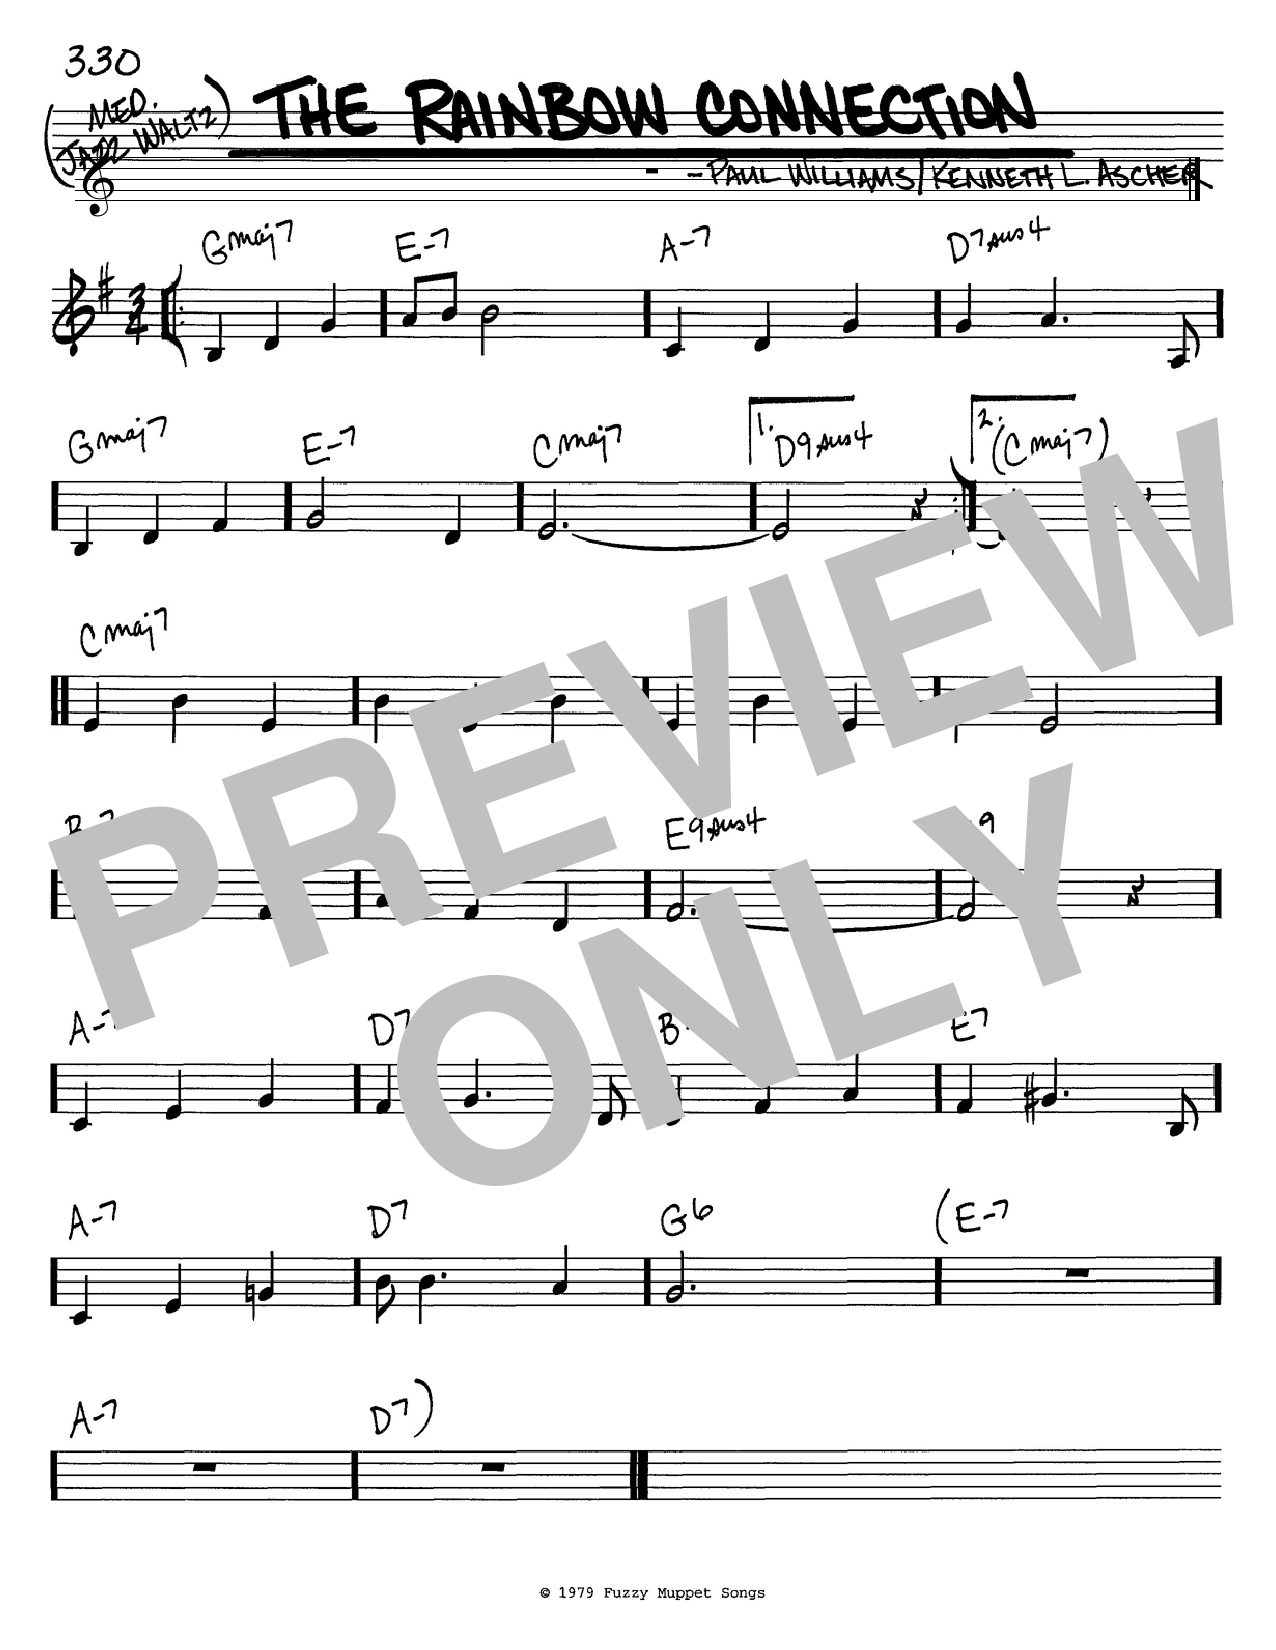 paul-williams-the-rainbow-connection-sheet-music-notes-download